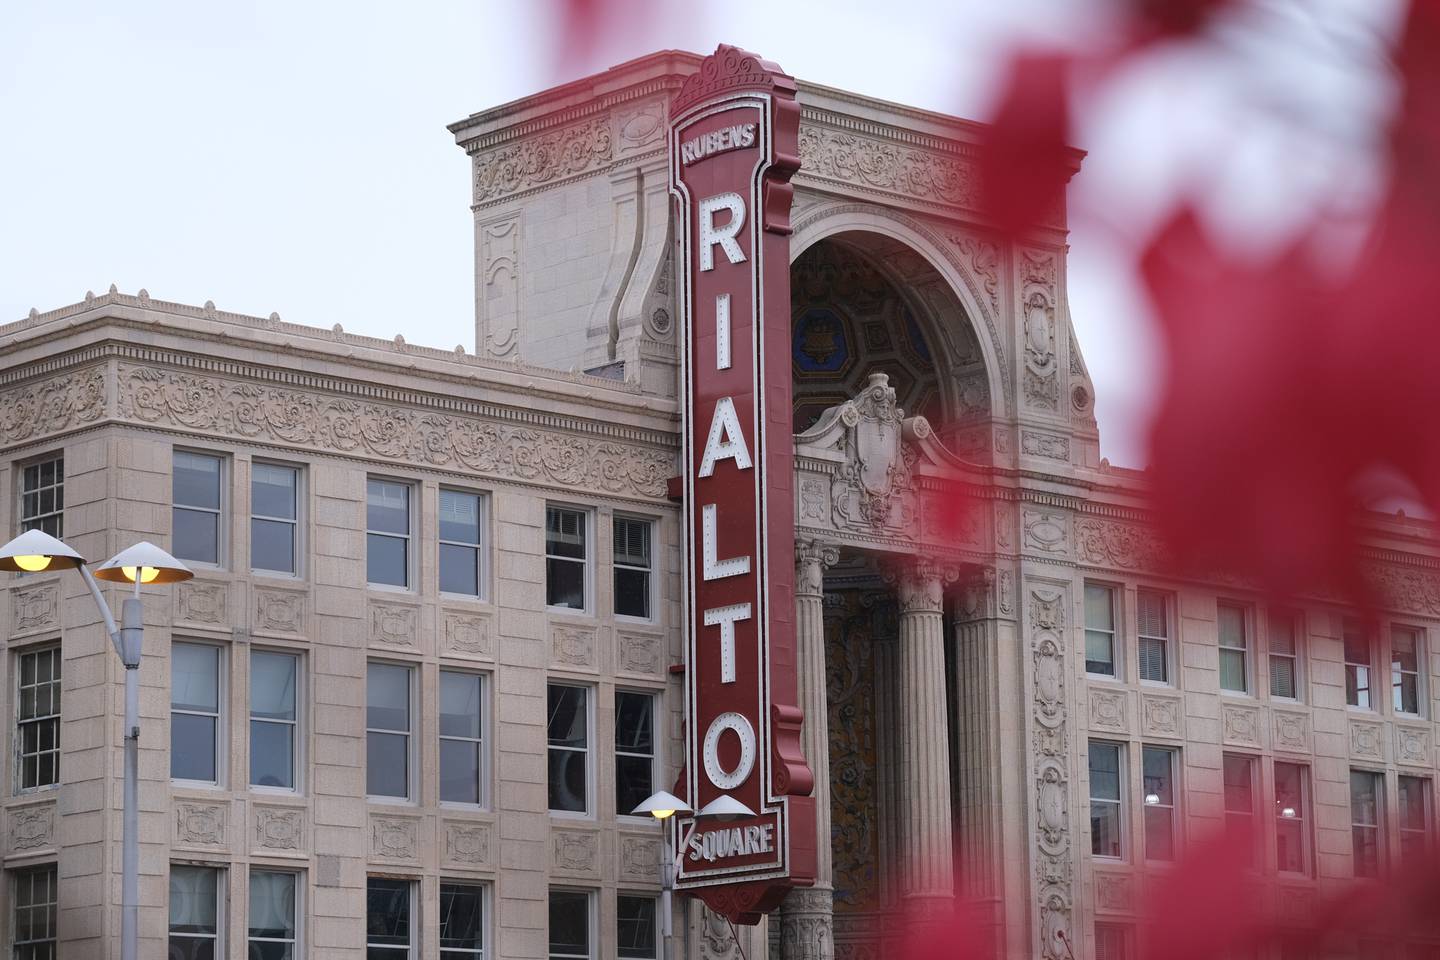 Rialto Square Theater along N. Chicago St.  in Joliet.